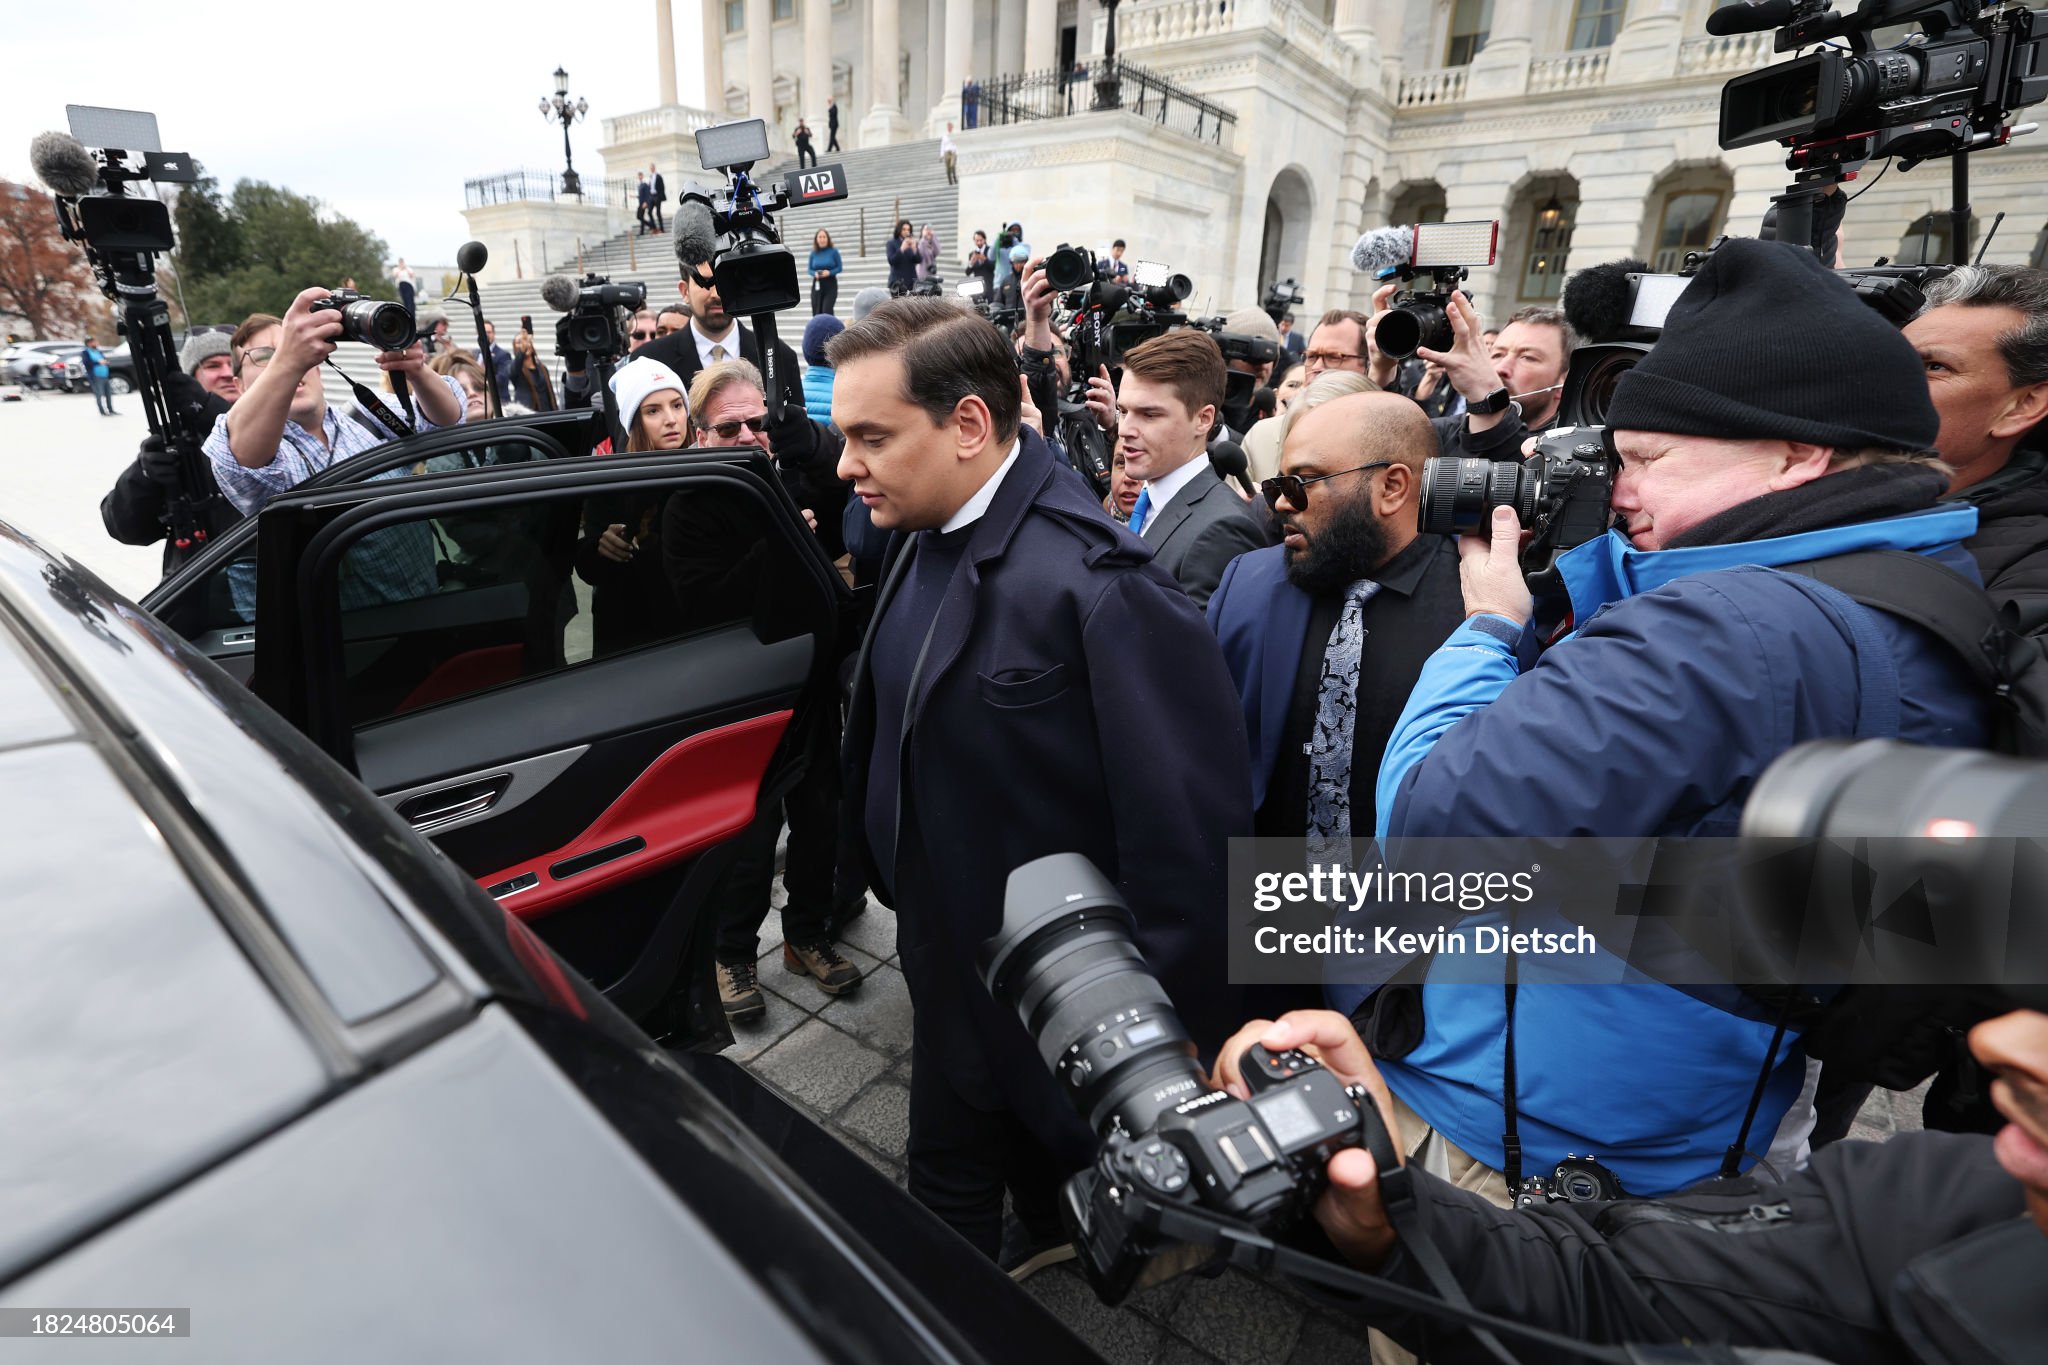 Getty Images (@GettyImages) / X